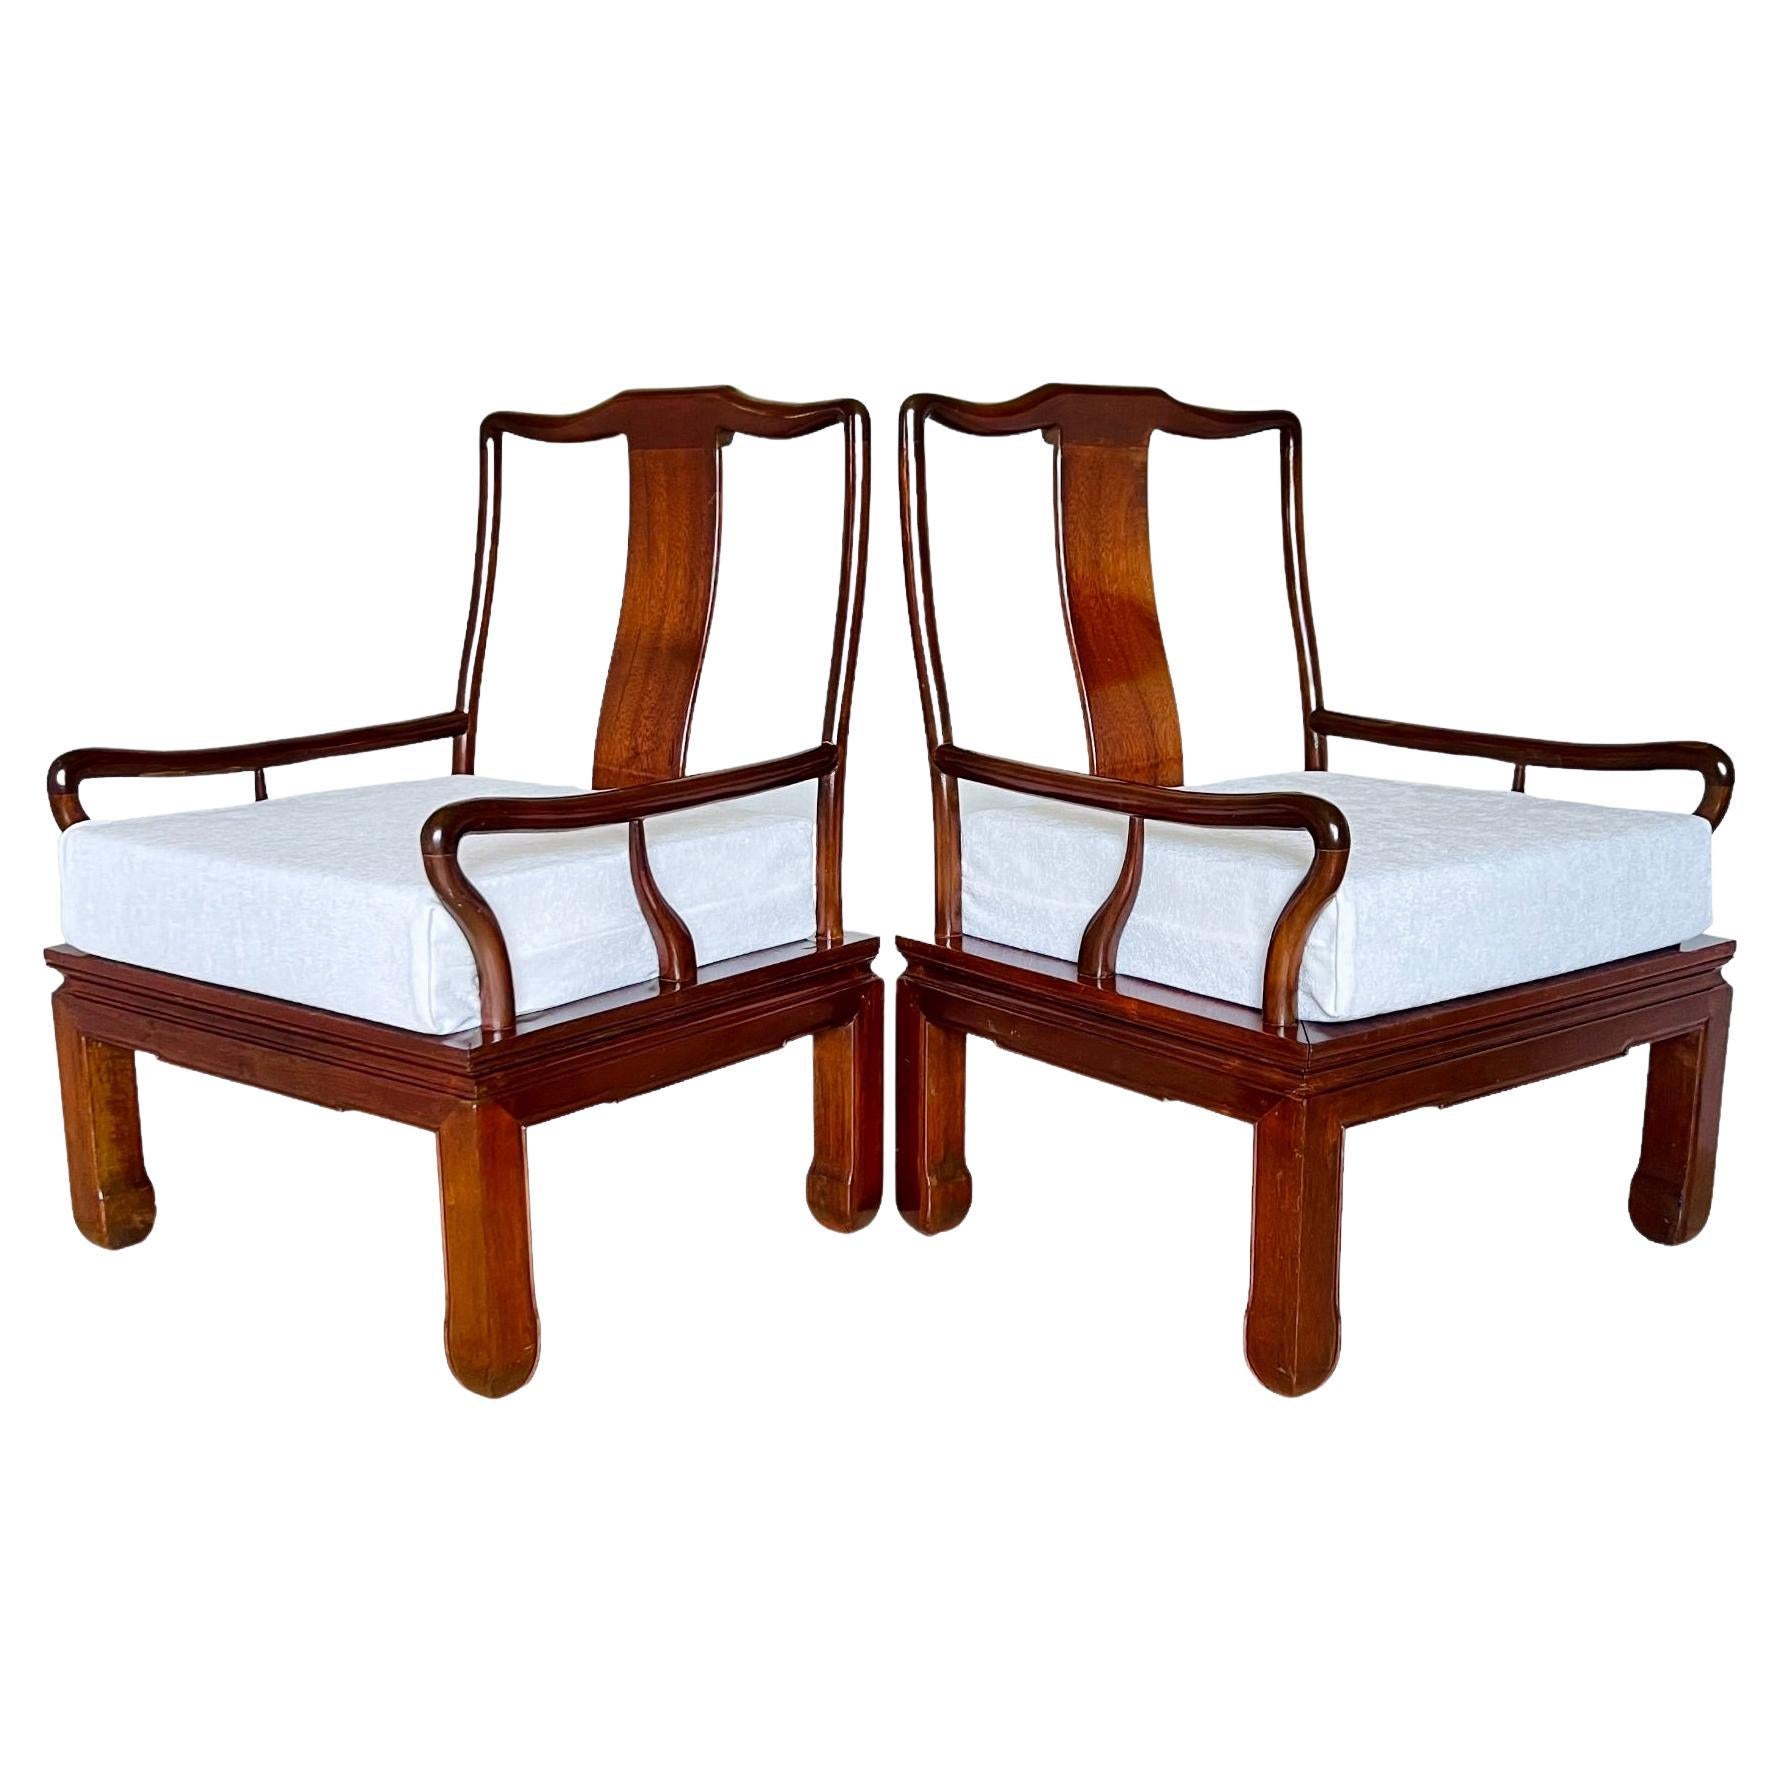 Vintage Chinese Ming Style Arm Chairs, a Pair